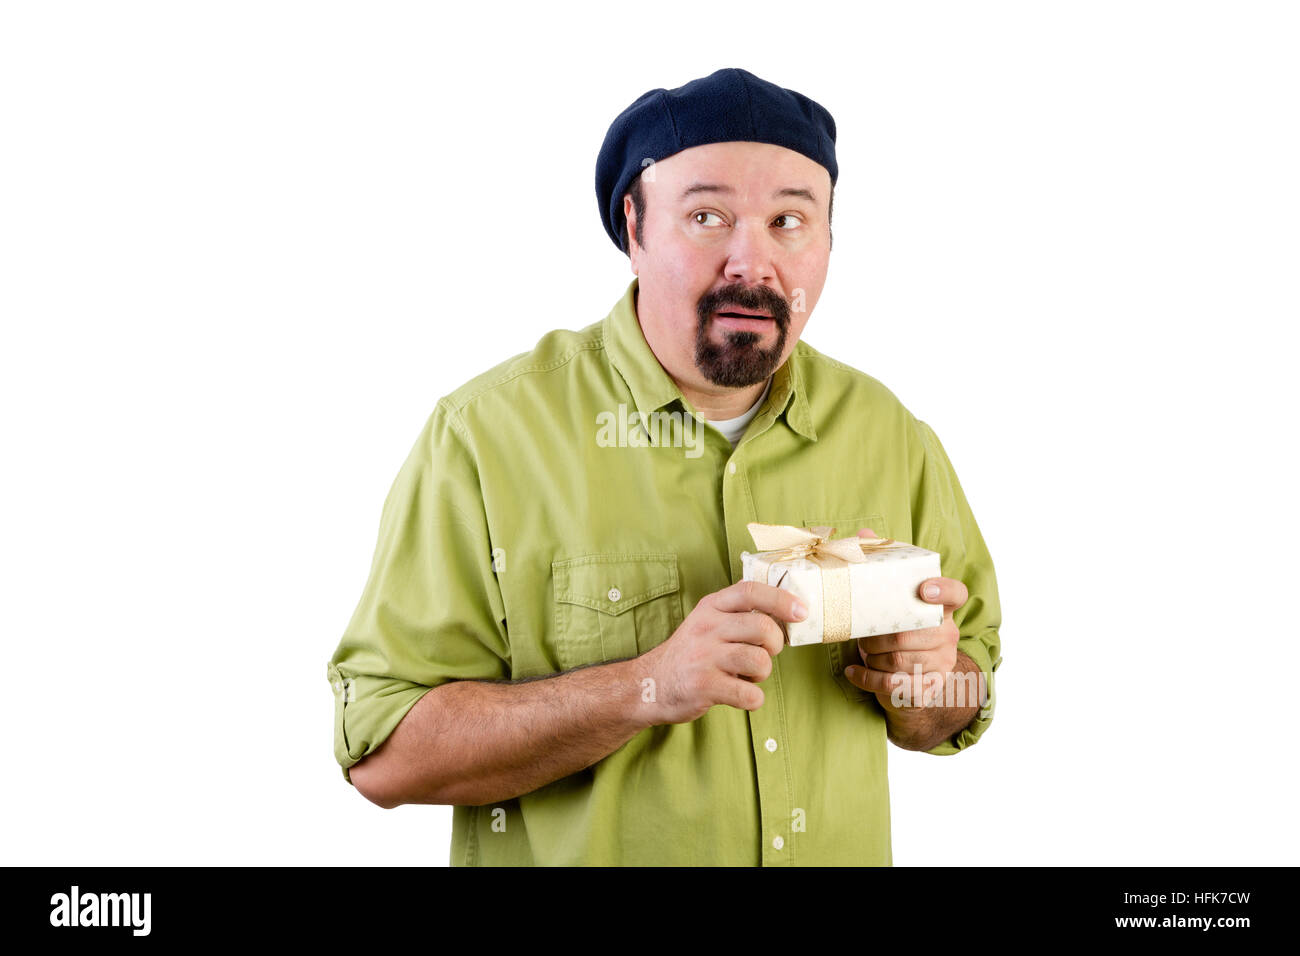 Half body portrait of nervous middle aged man with wrapped present glancing to side on white Stock Photo